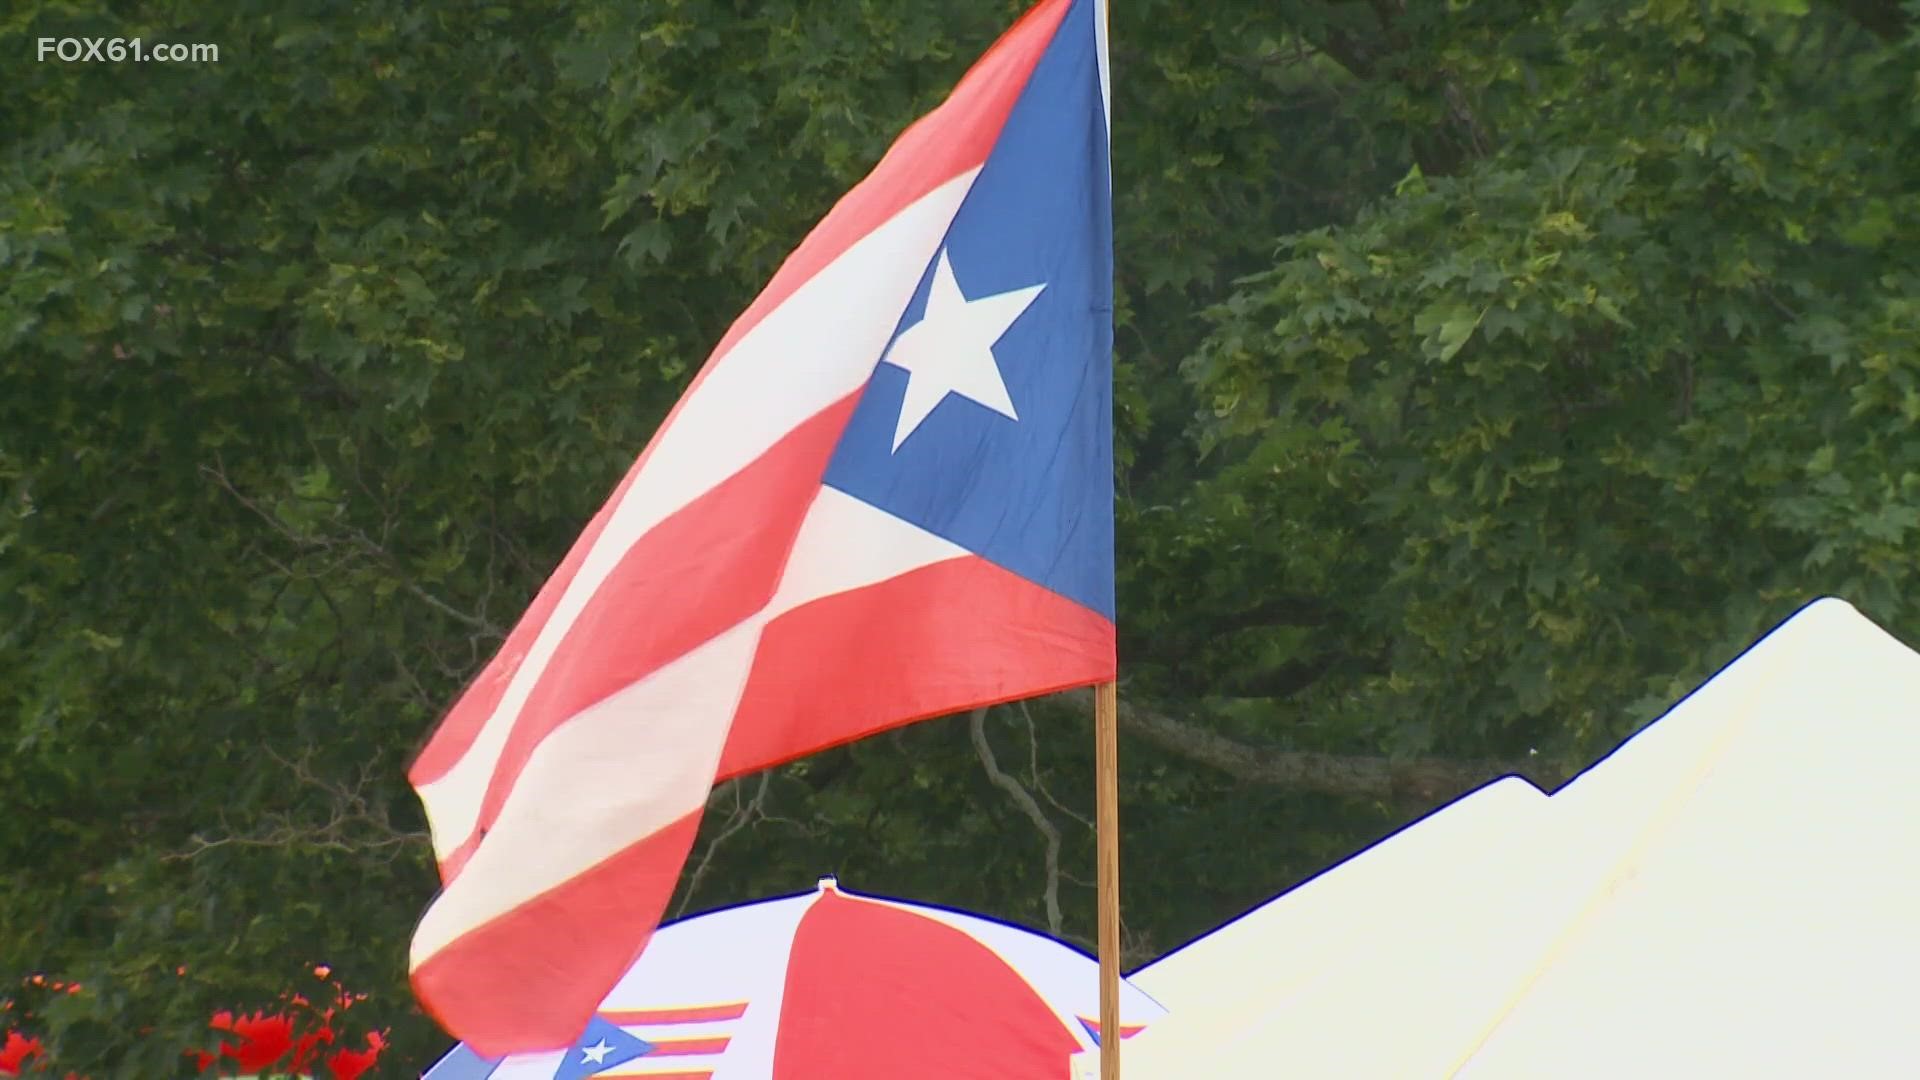 A group of Puerto Rican lawmakers says they find the term offensive and that there are plenty of other appropriate terms.